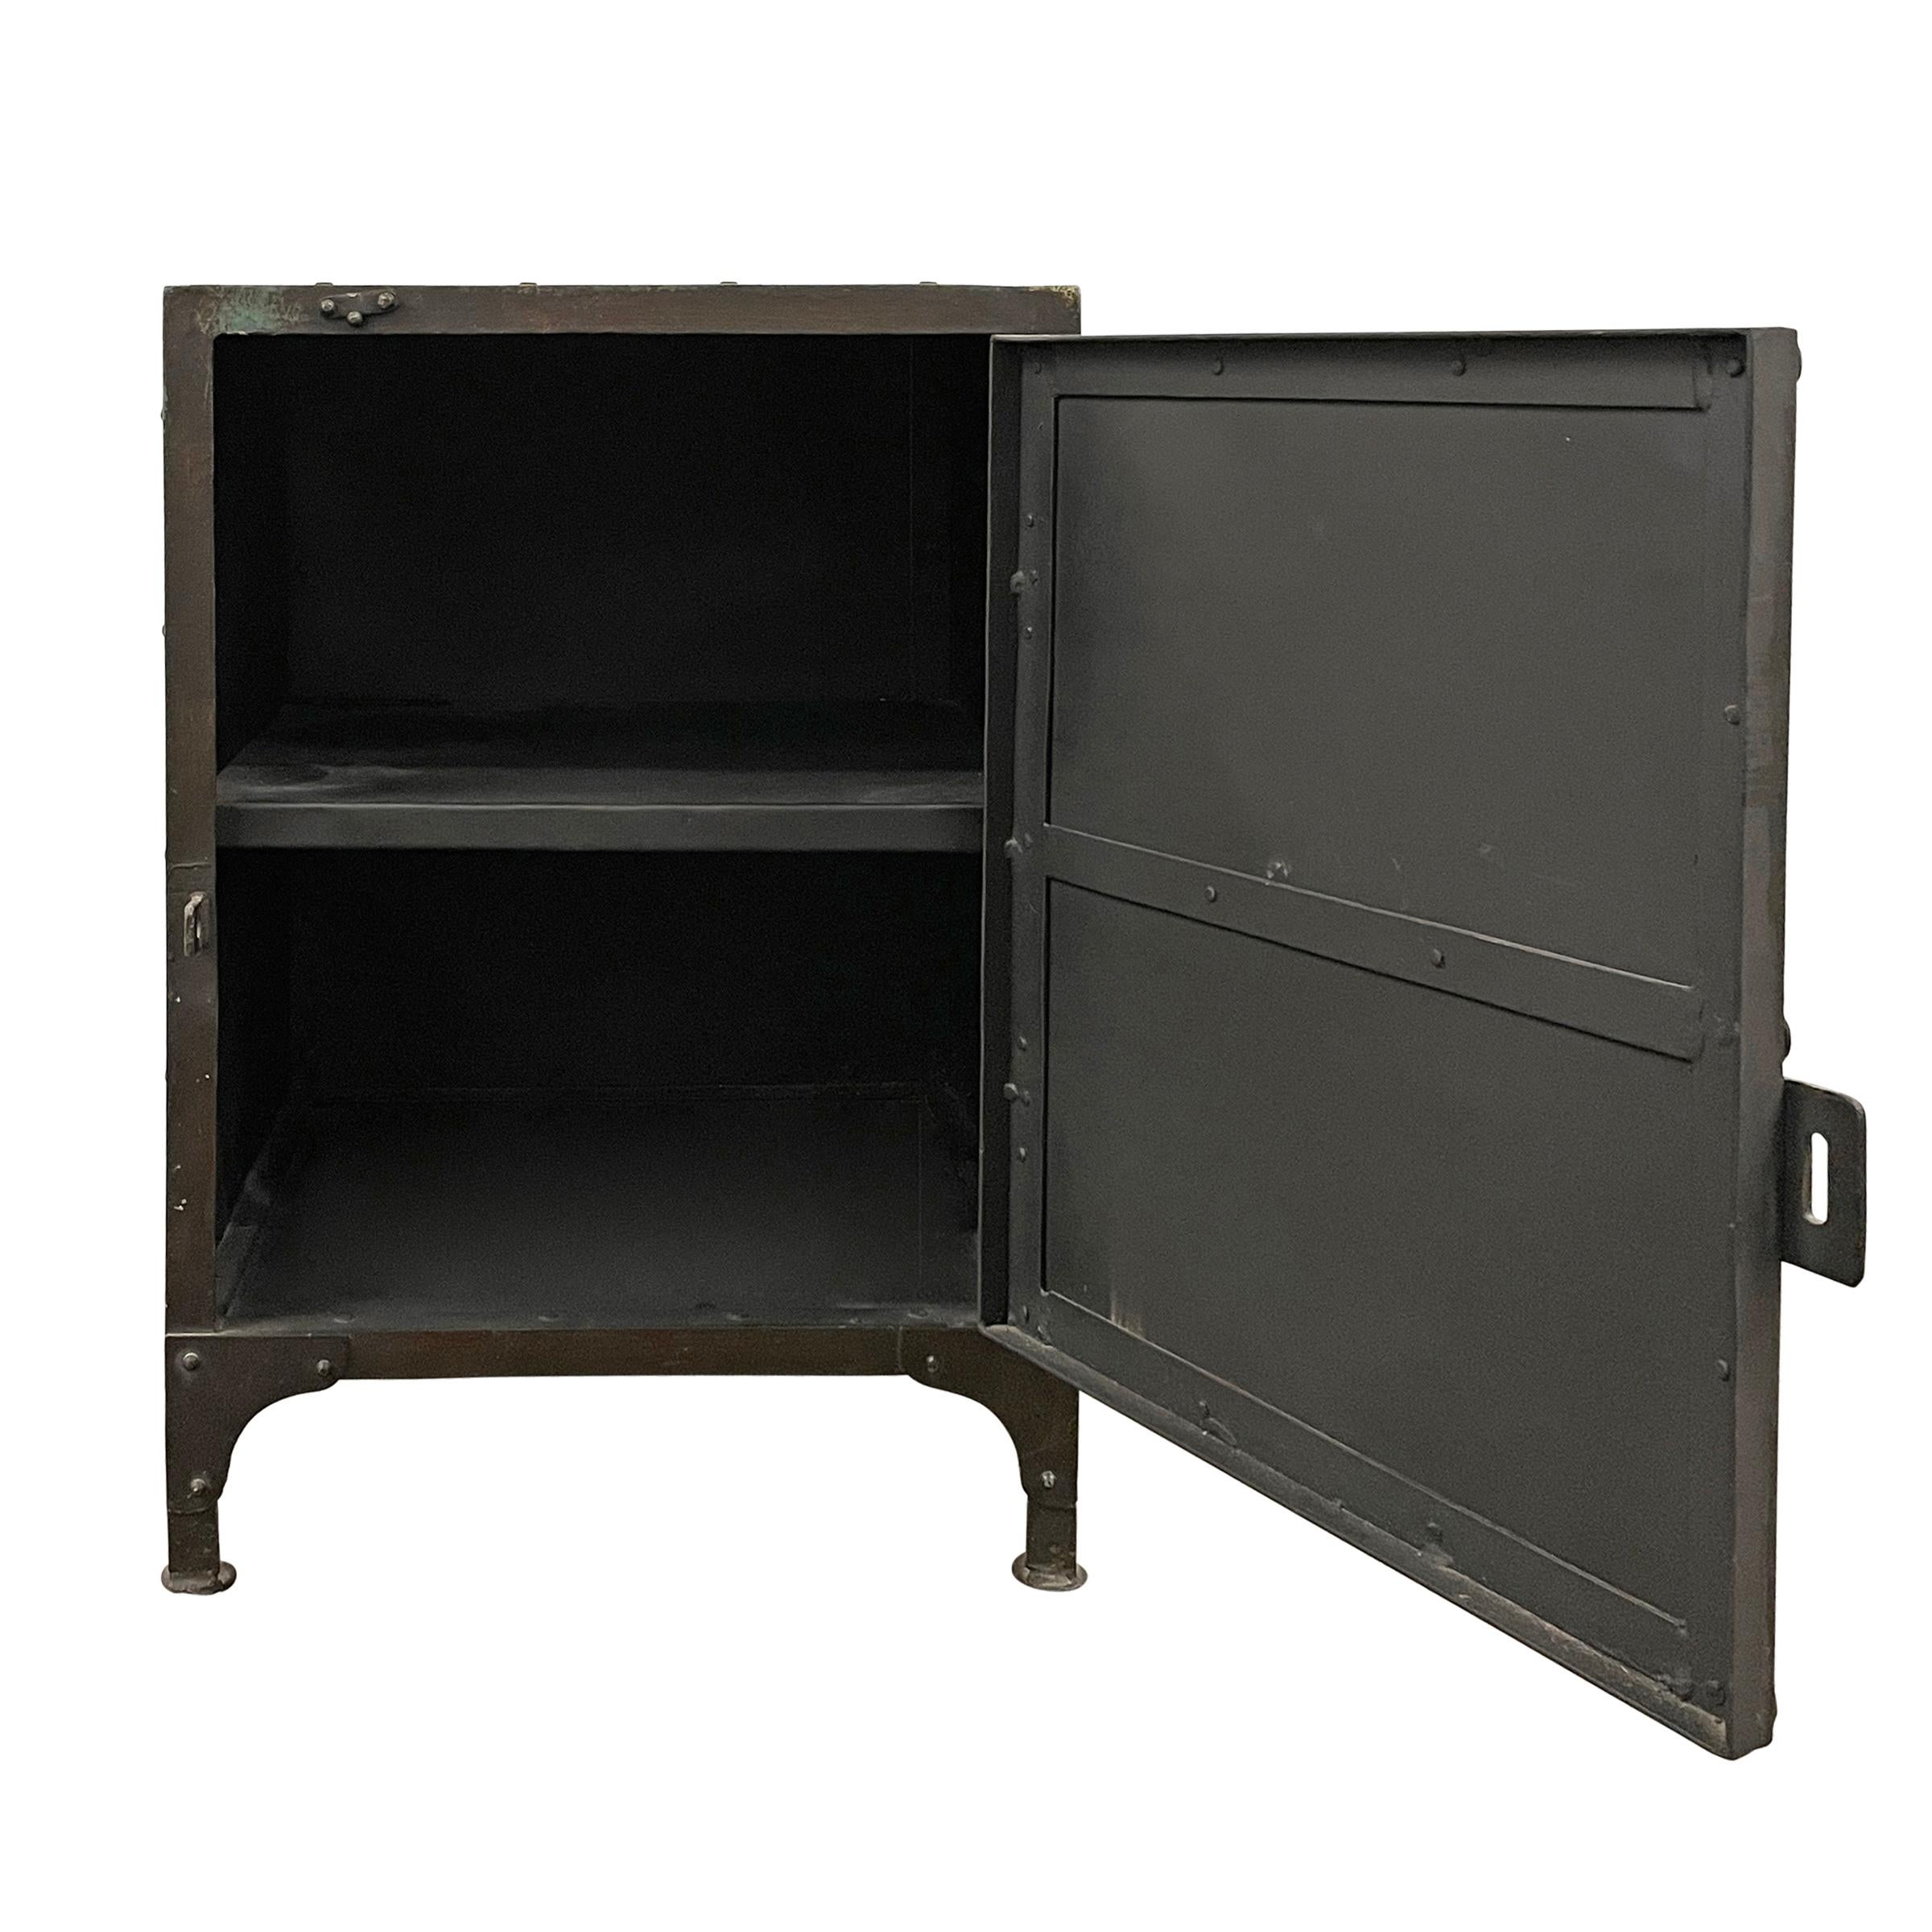 20th Century Pair of American Industrial Steel Cabinets